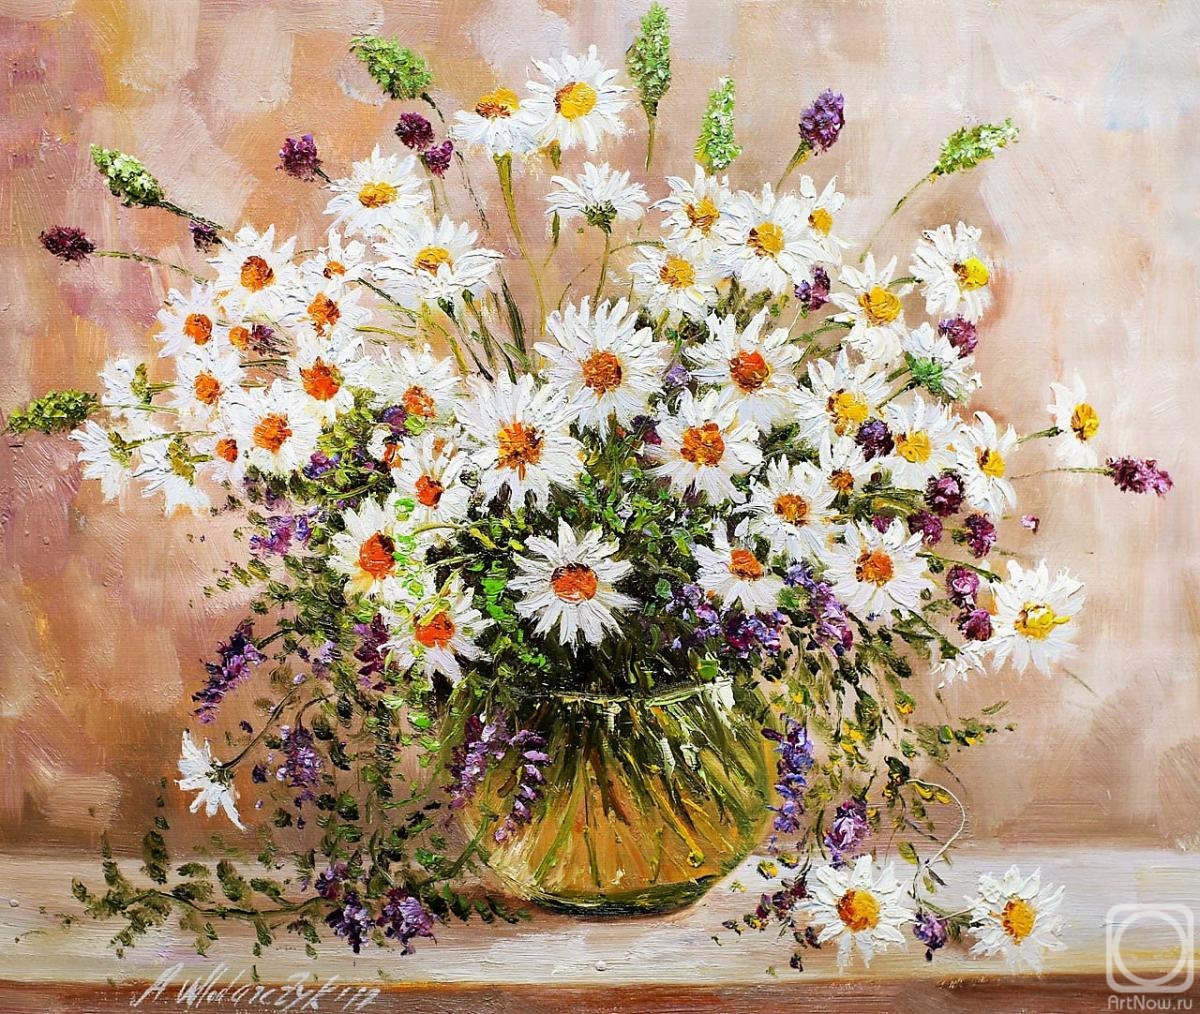 Vlodarchik Andjei. Bouquet of daisies with summer herbs